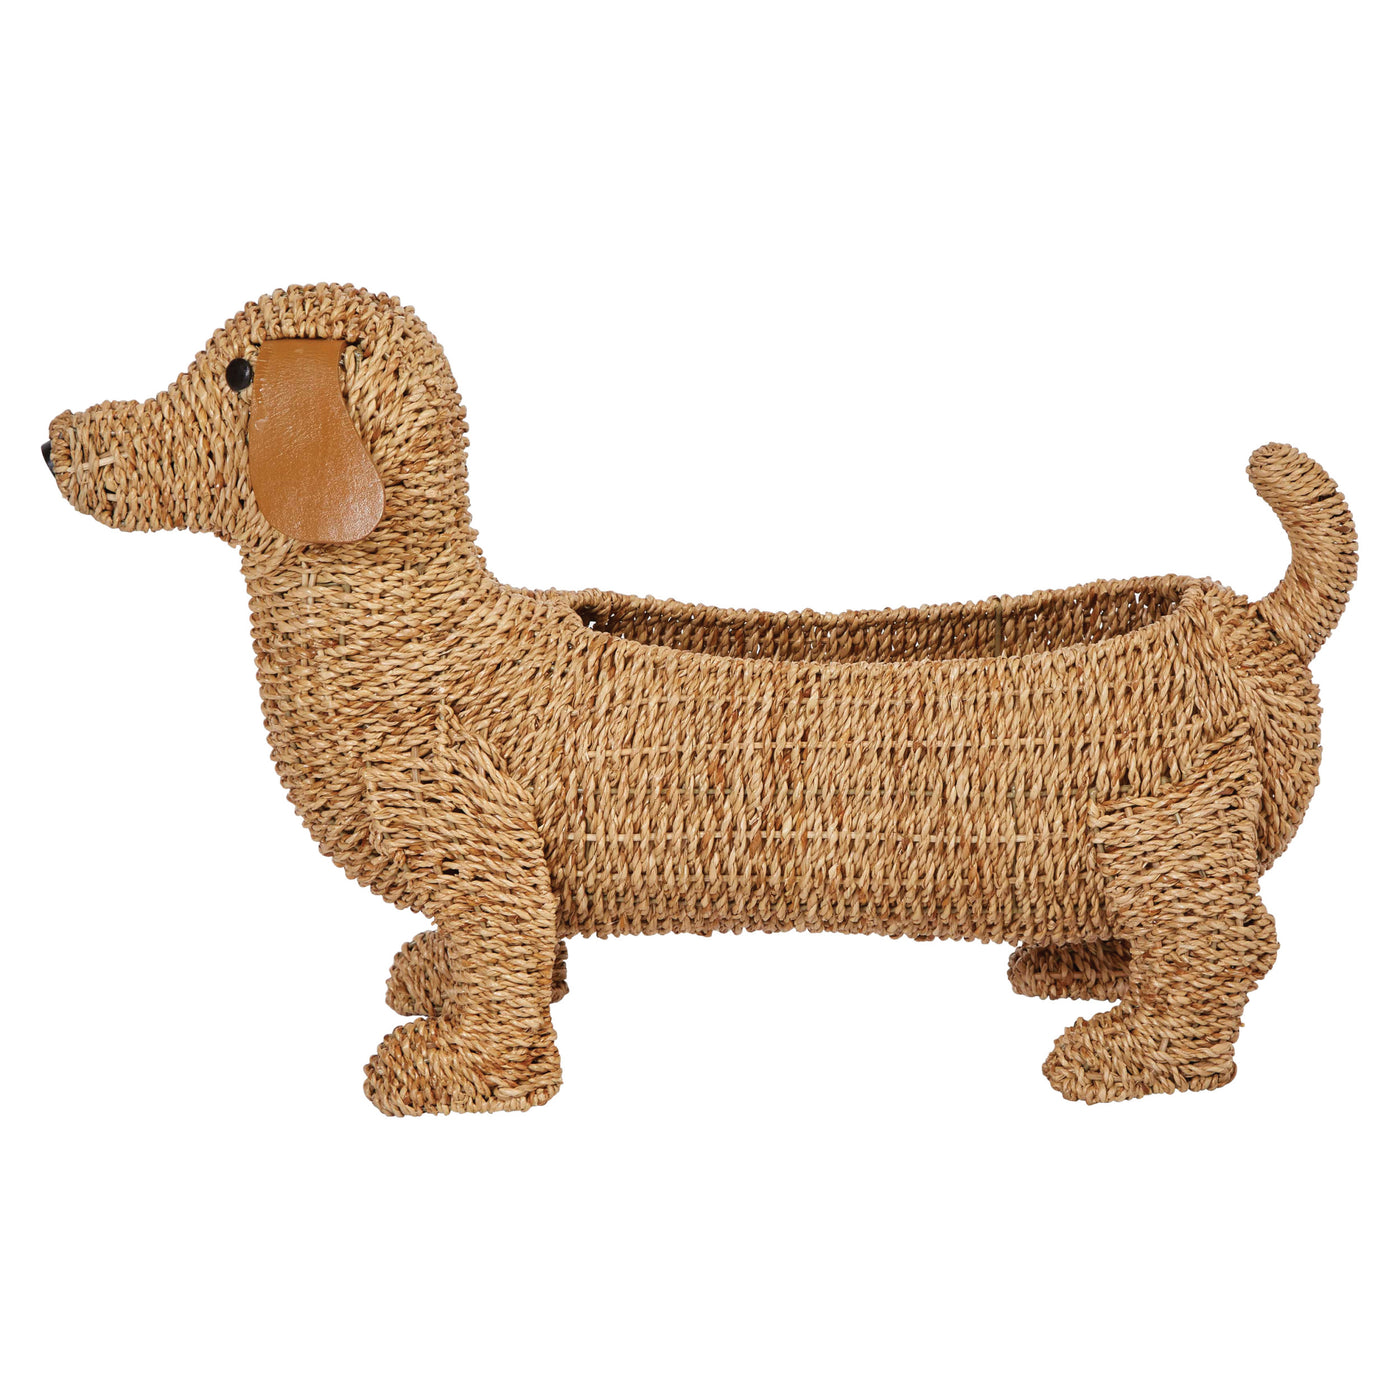 Hand-Woven Dog Basket with Leather Ears